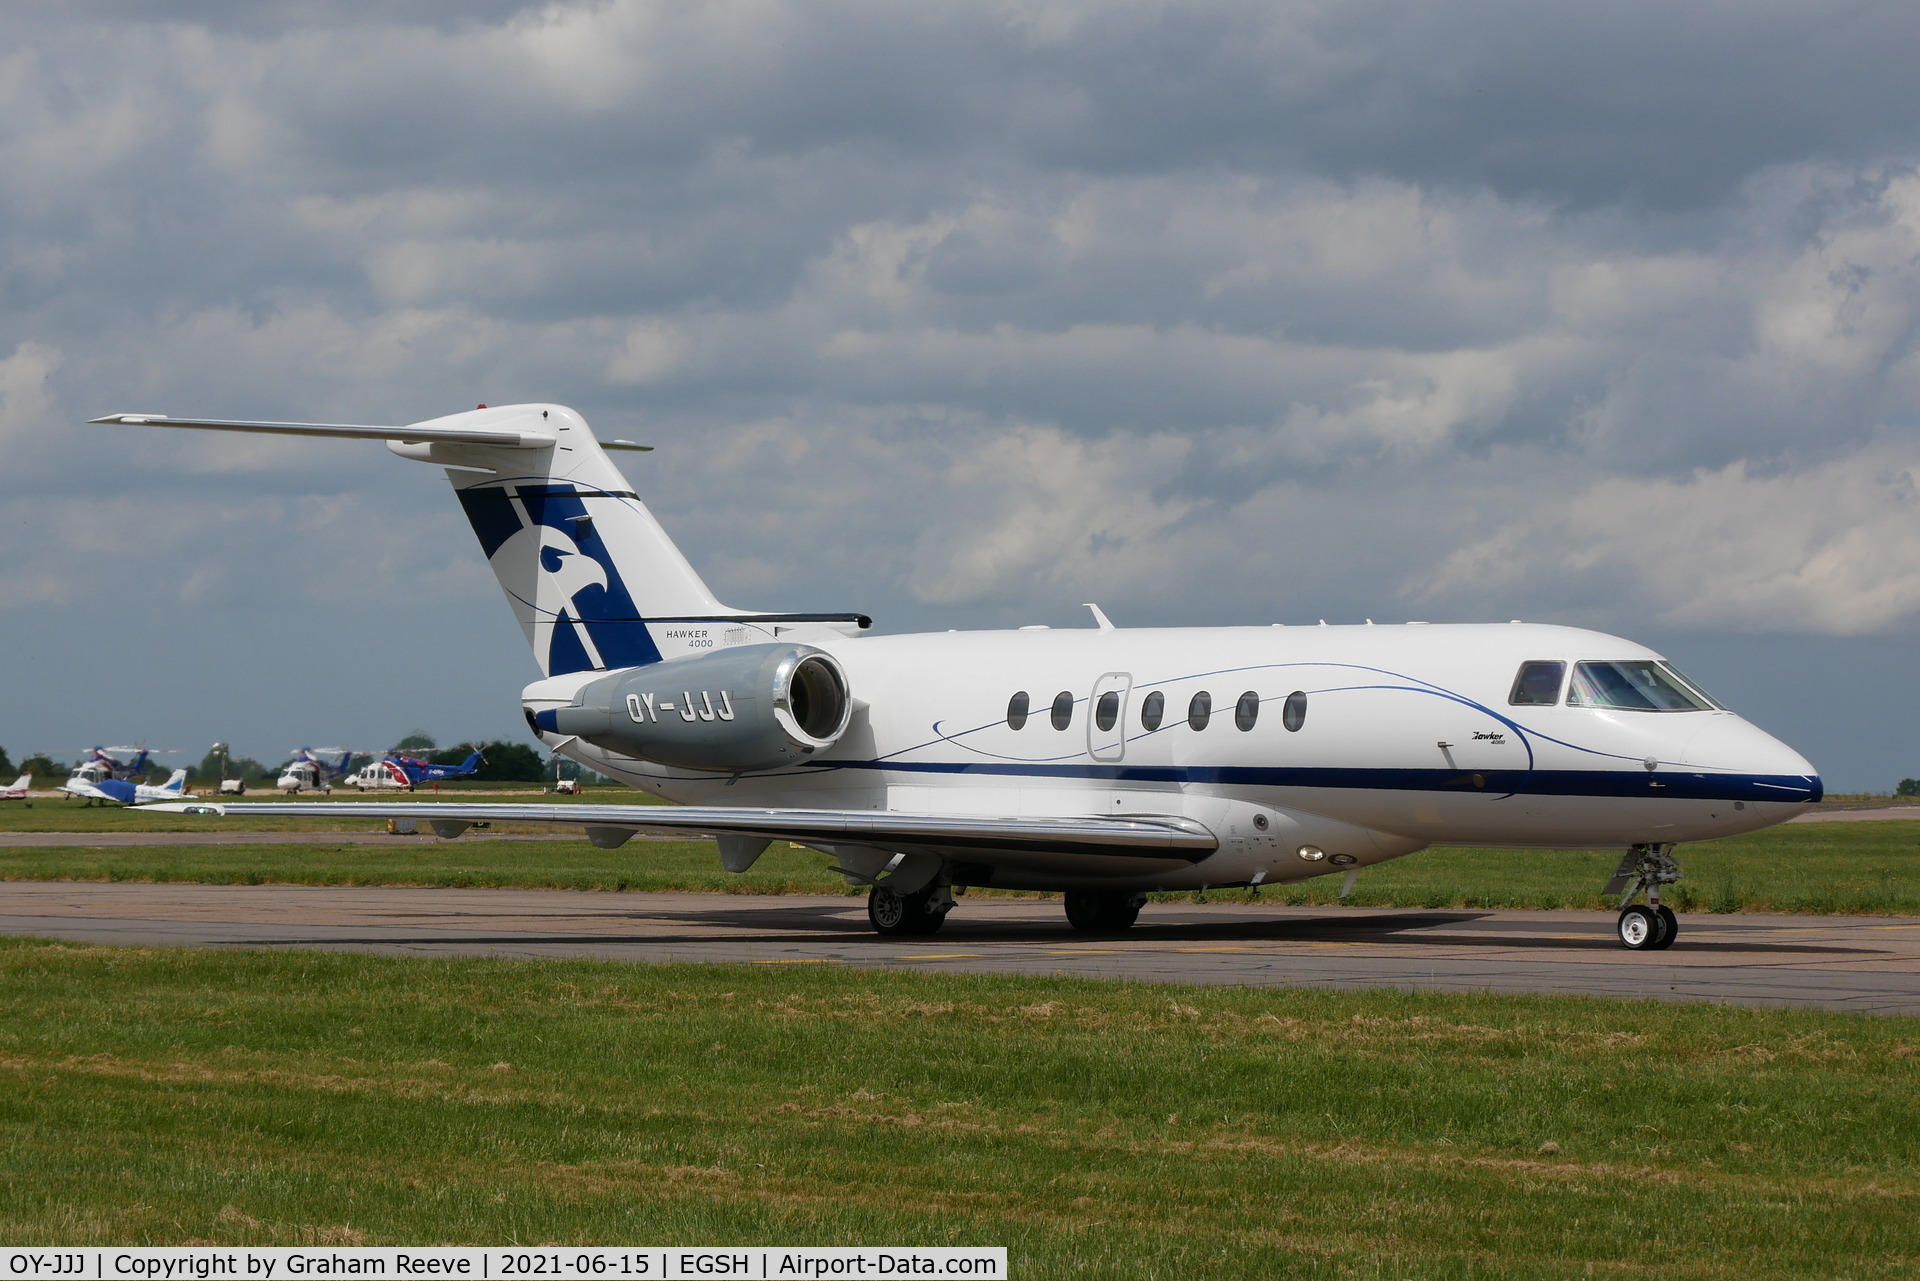 OY-JJJ, 2011 Hawker Beechcraft 4000 C/N RC-57, On the way to stand seven.